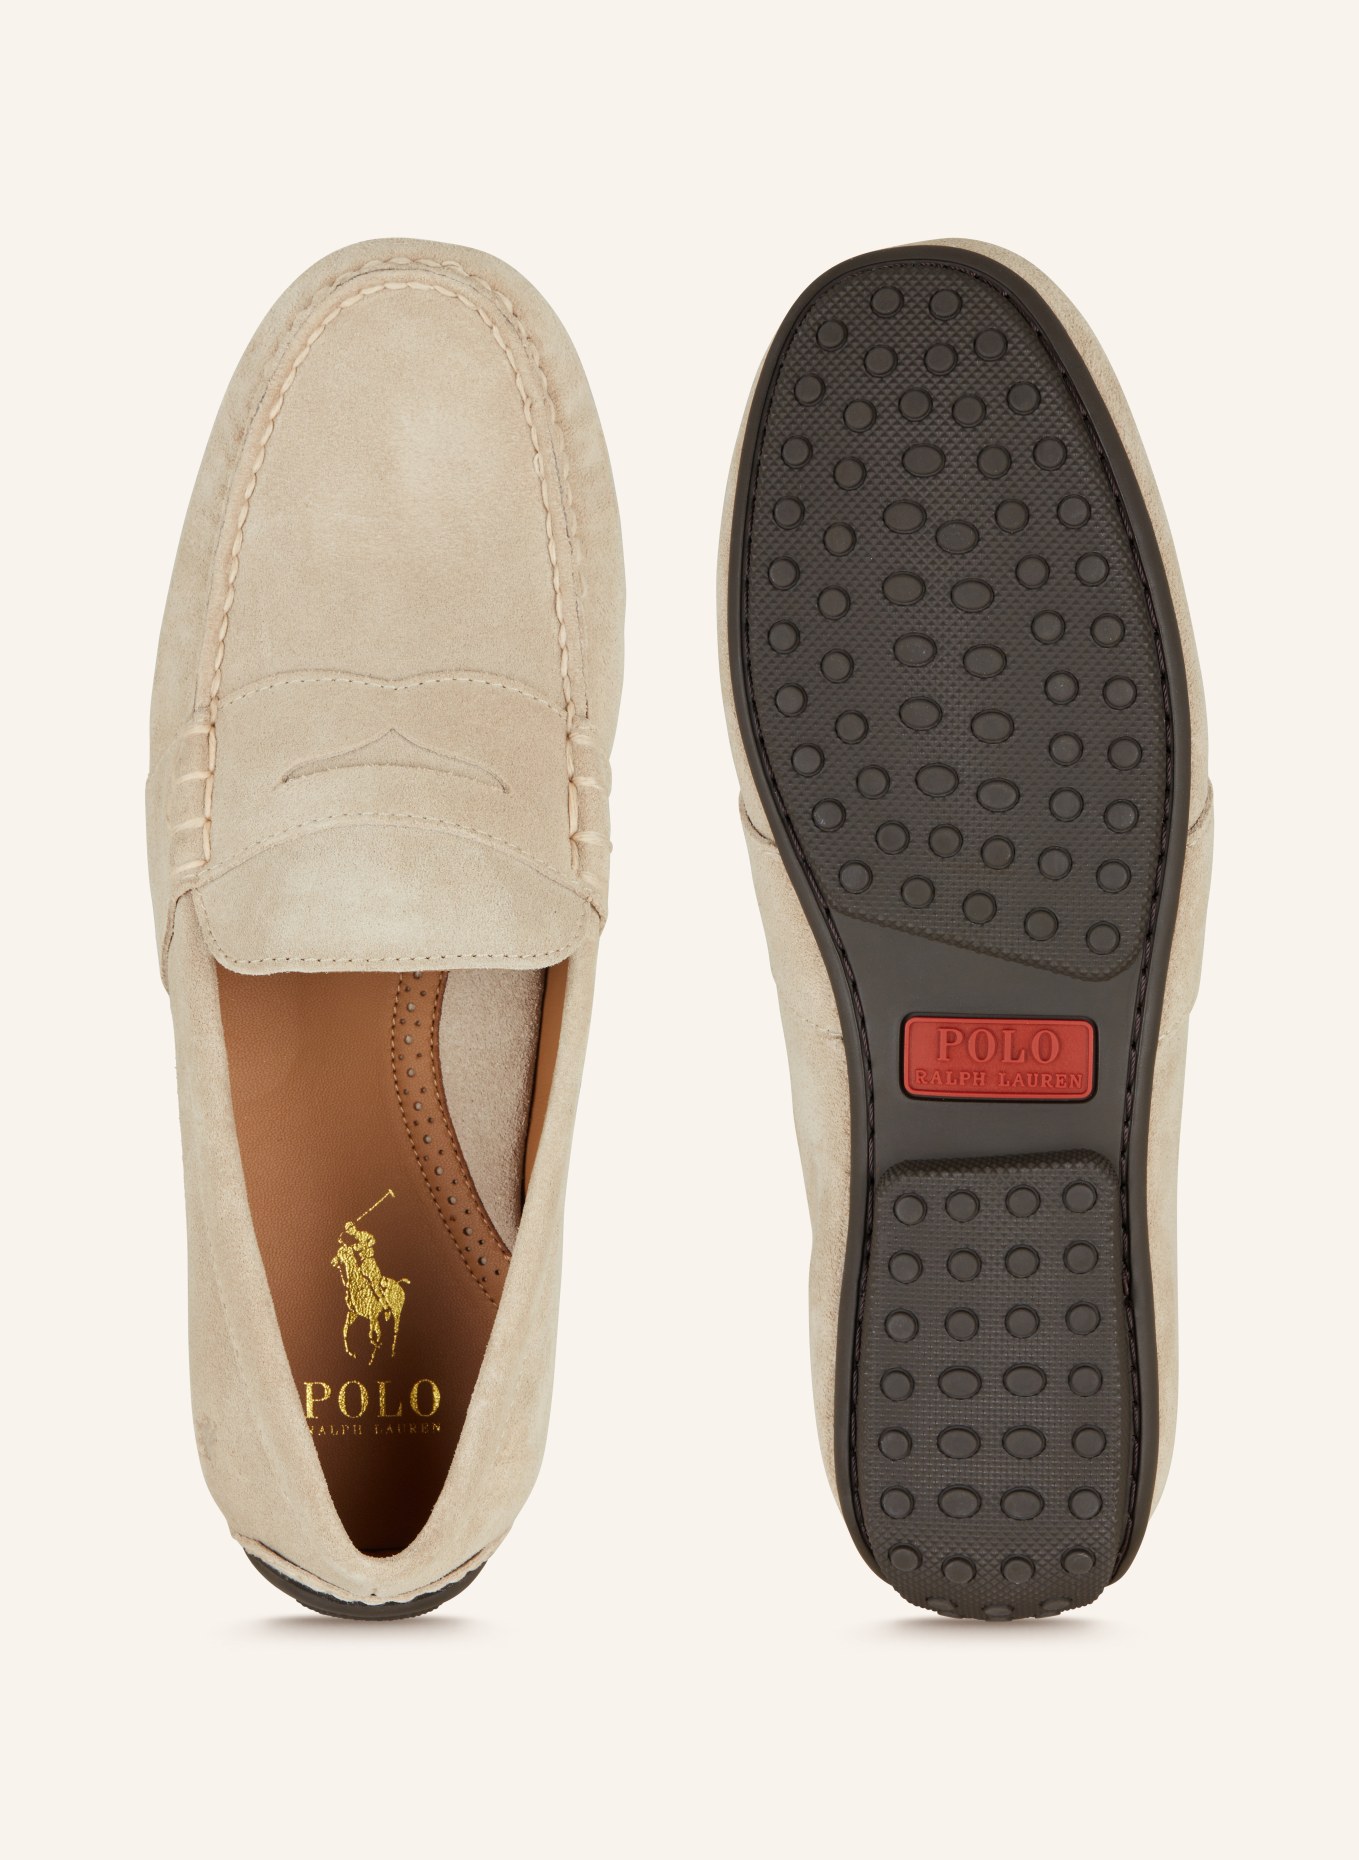 POLO RALPH LAUREN Penny loafers REYNOLD, Color: BEIGE (Image 5)